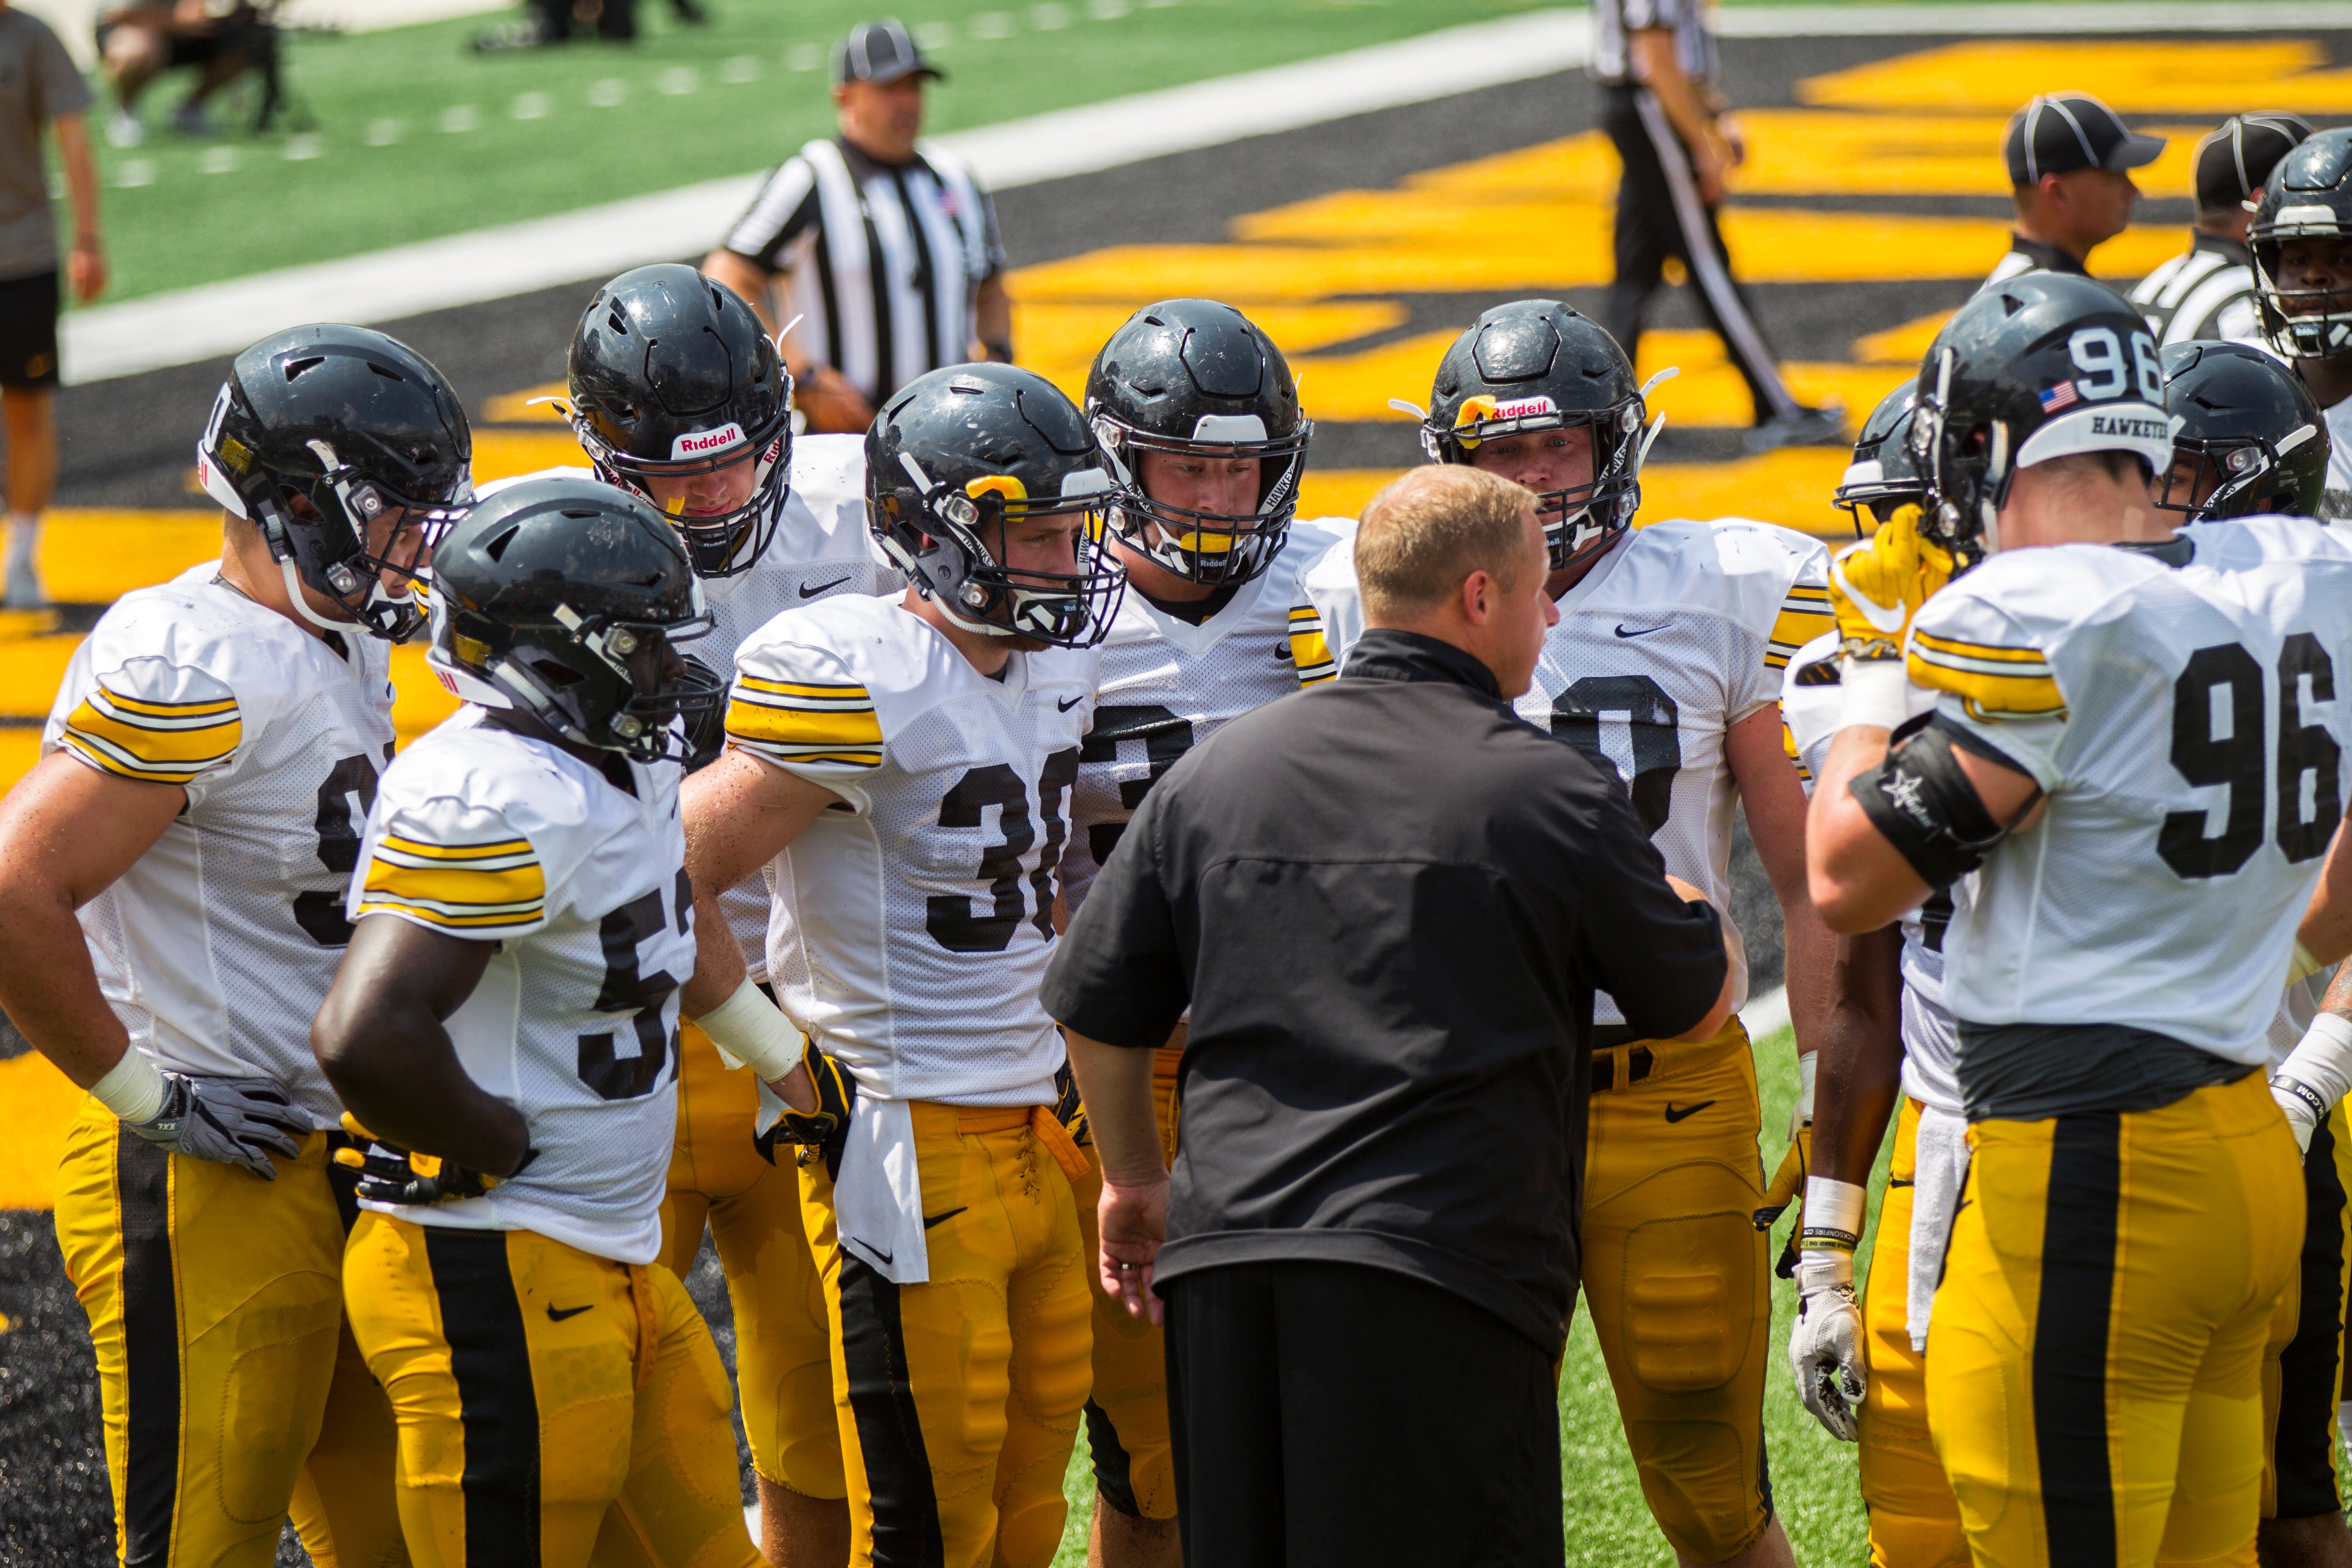 Iowa linebackers coach Seth Wallace talks with players during a Kids Day practice on Saturday, Aug. 11, 2018, at Kinnick Stadium in Iowa City.